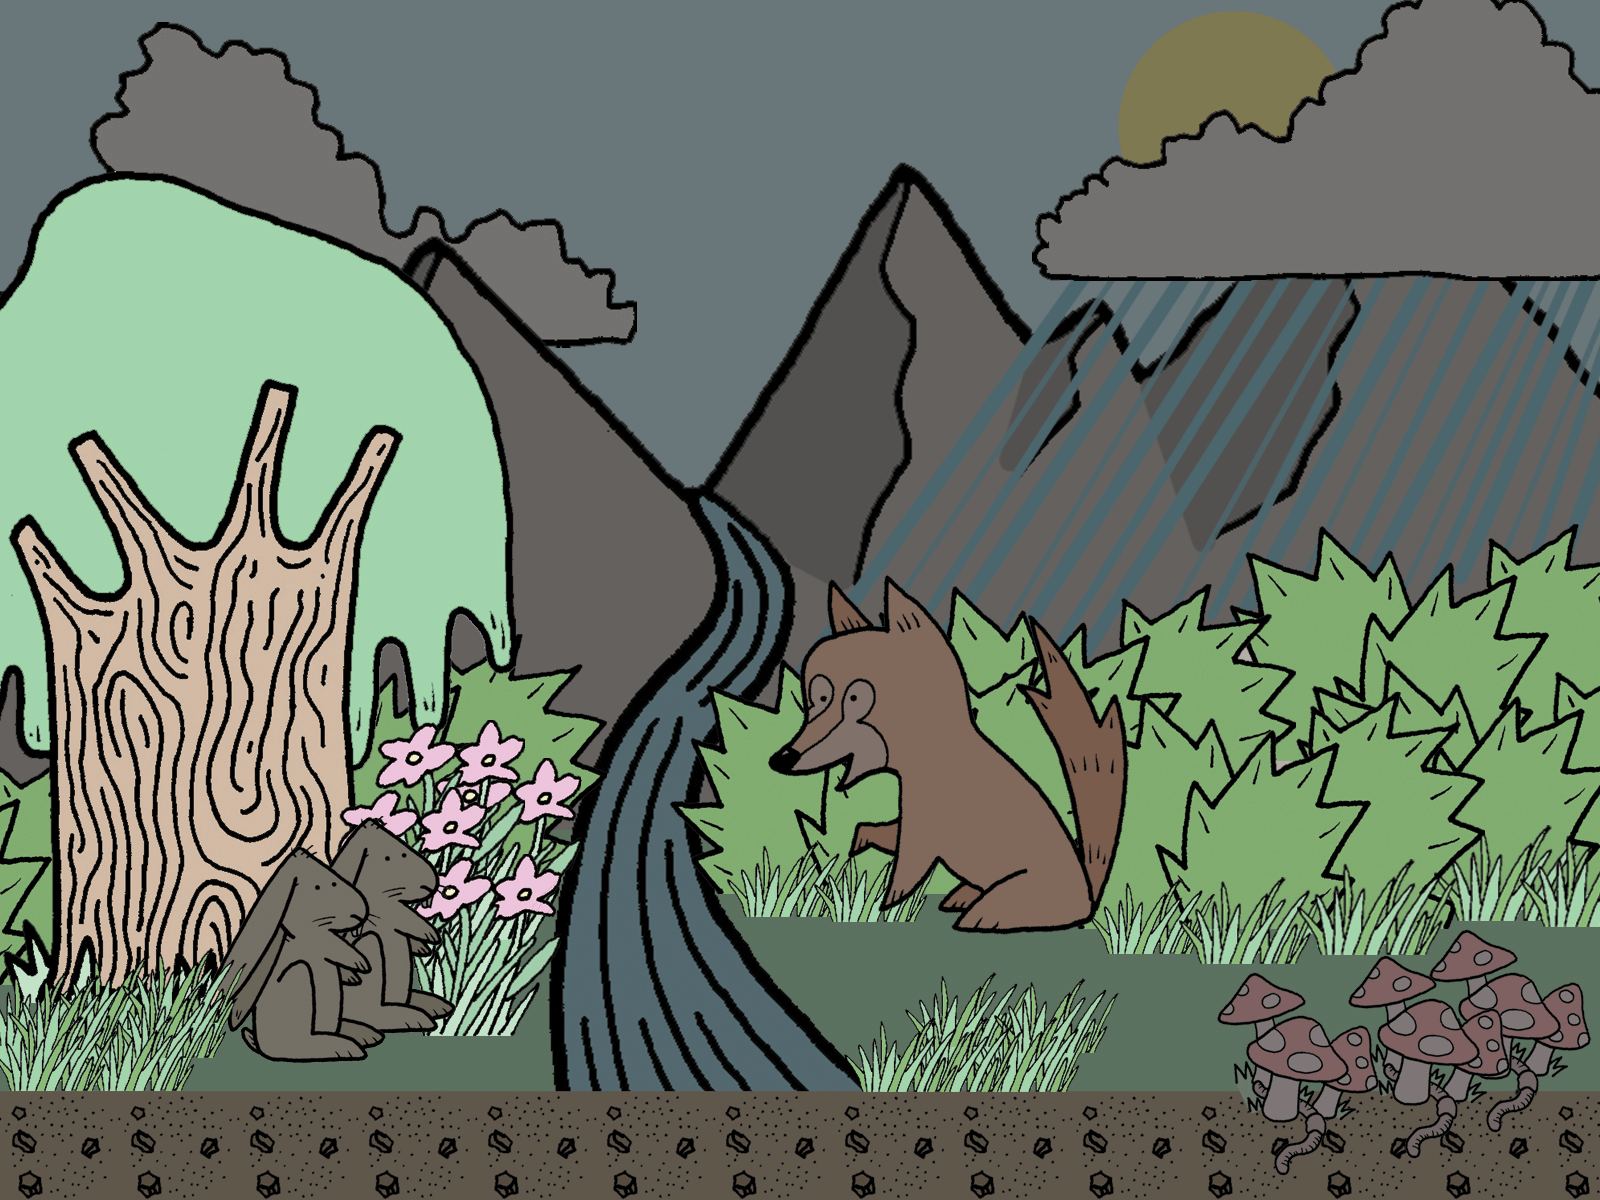 Cartoon representation of a forest with plants and animals, highlighting an analogy between plants (trees and flowers) and writing program curricula.